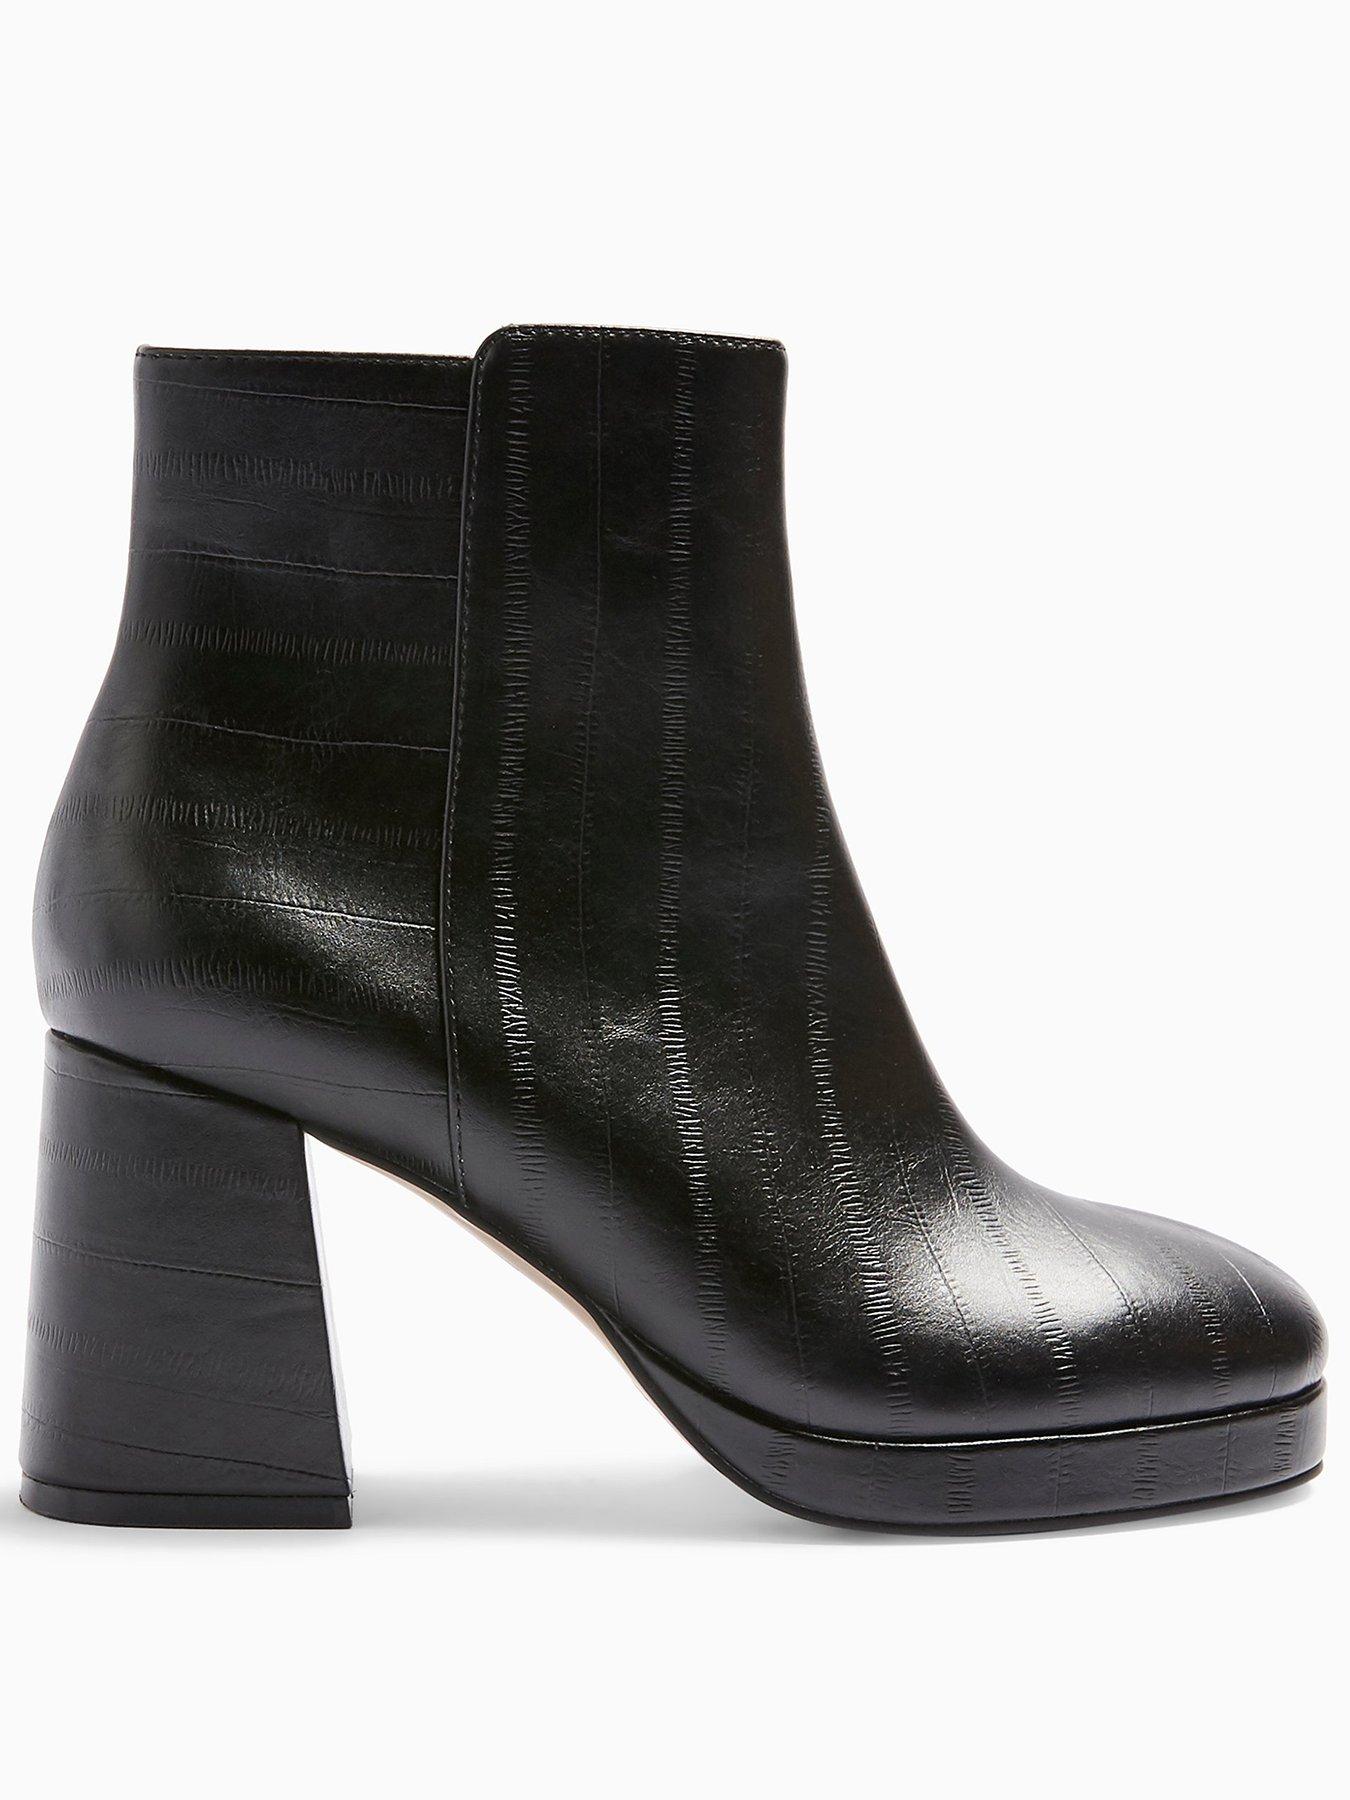 wide fit leather ankle boots uk